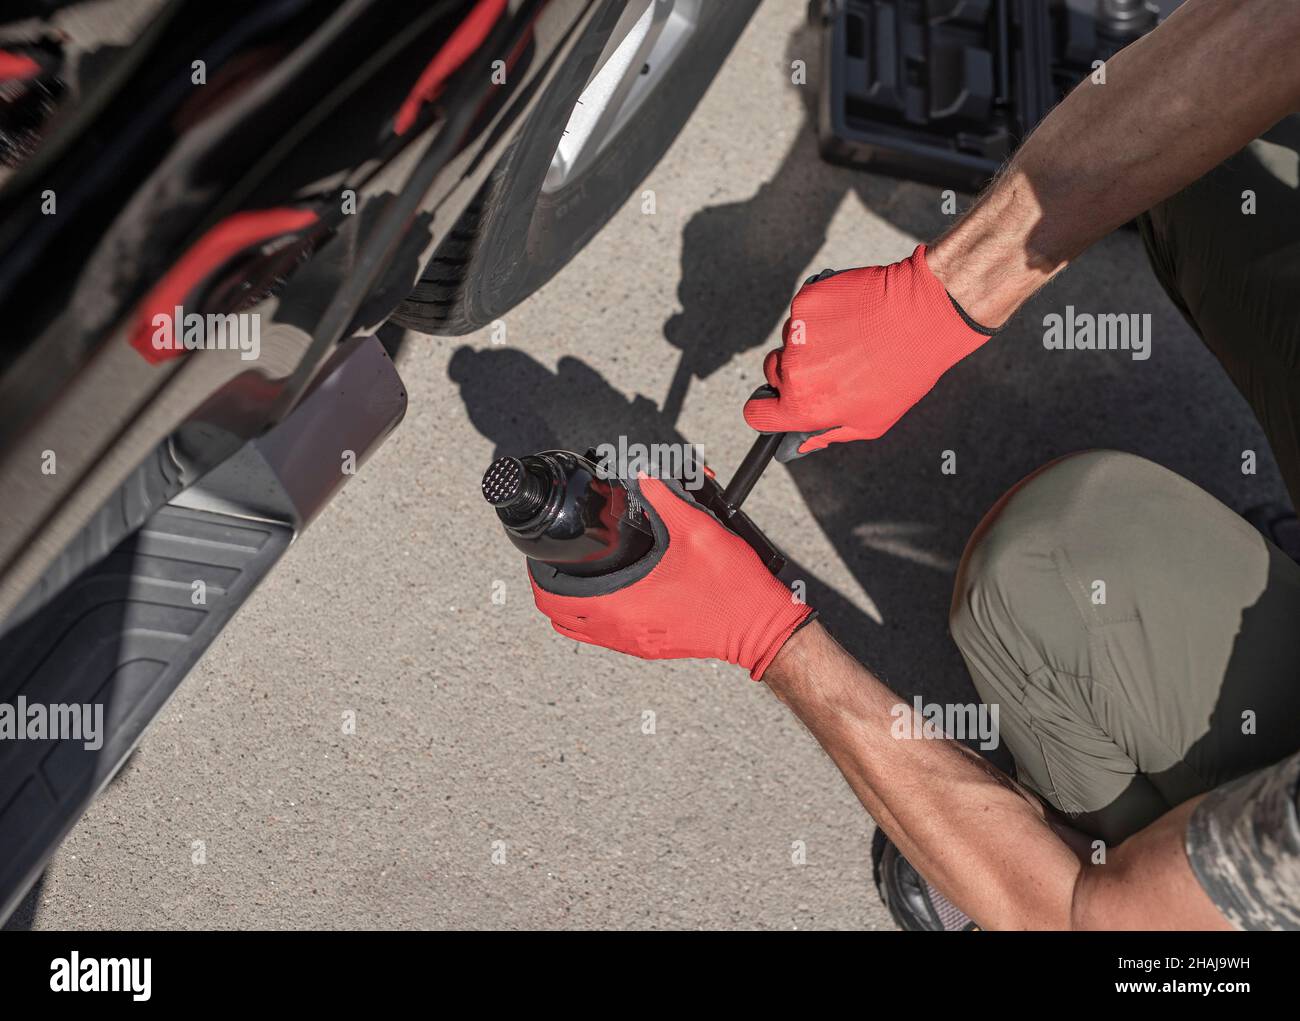 Hydraulic car jack is put under auto by male hands, top view. Stock Photo